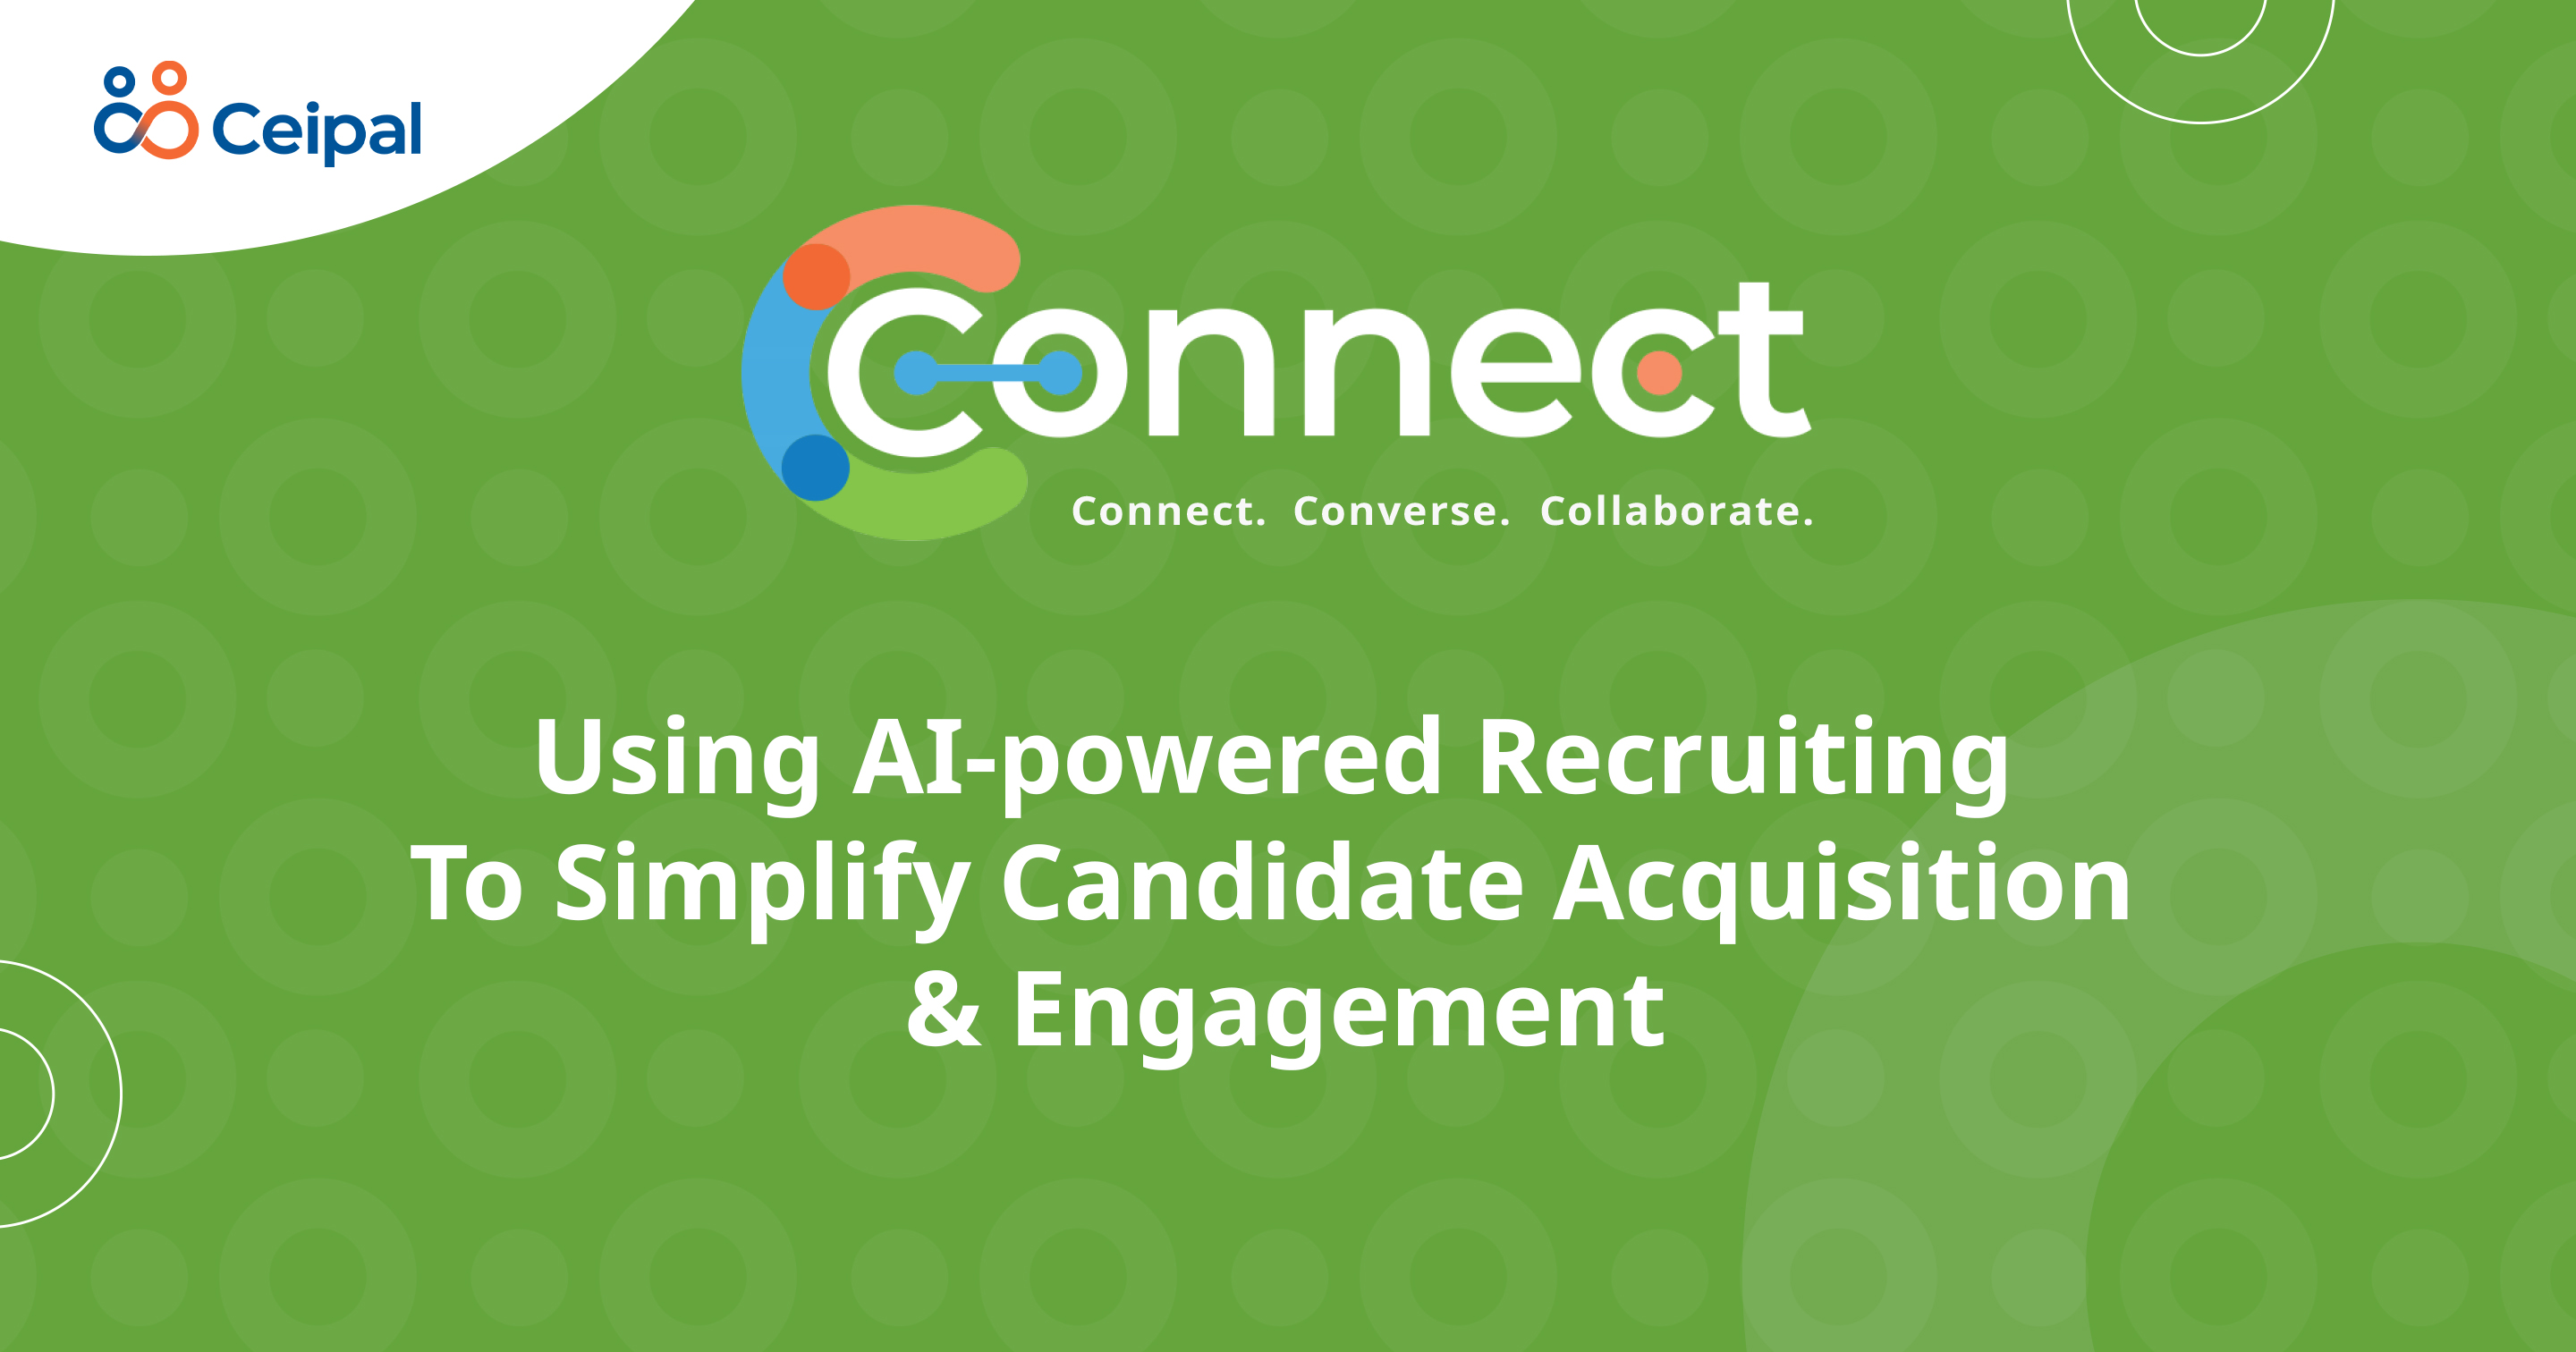 Using AI-Powered Recruiting To Simplify Candidate Acquisition & Engagement